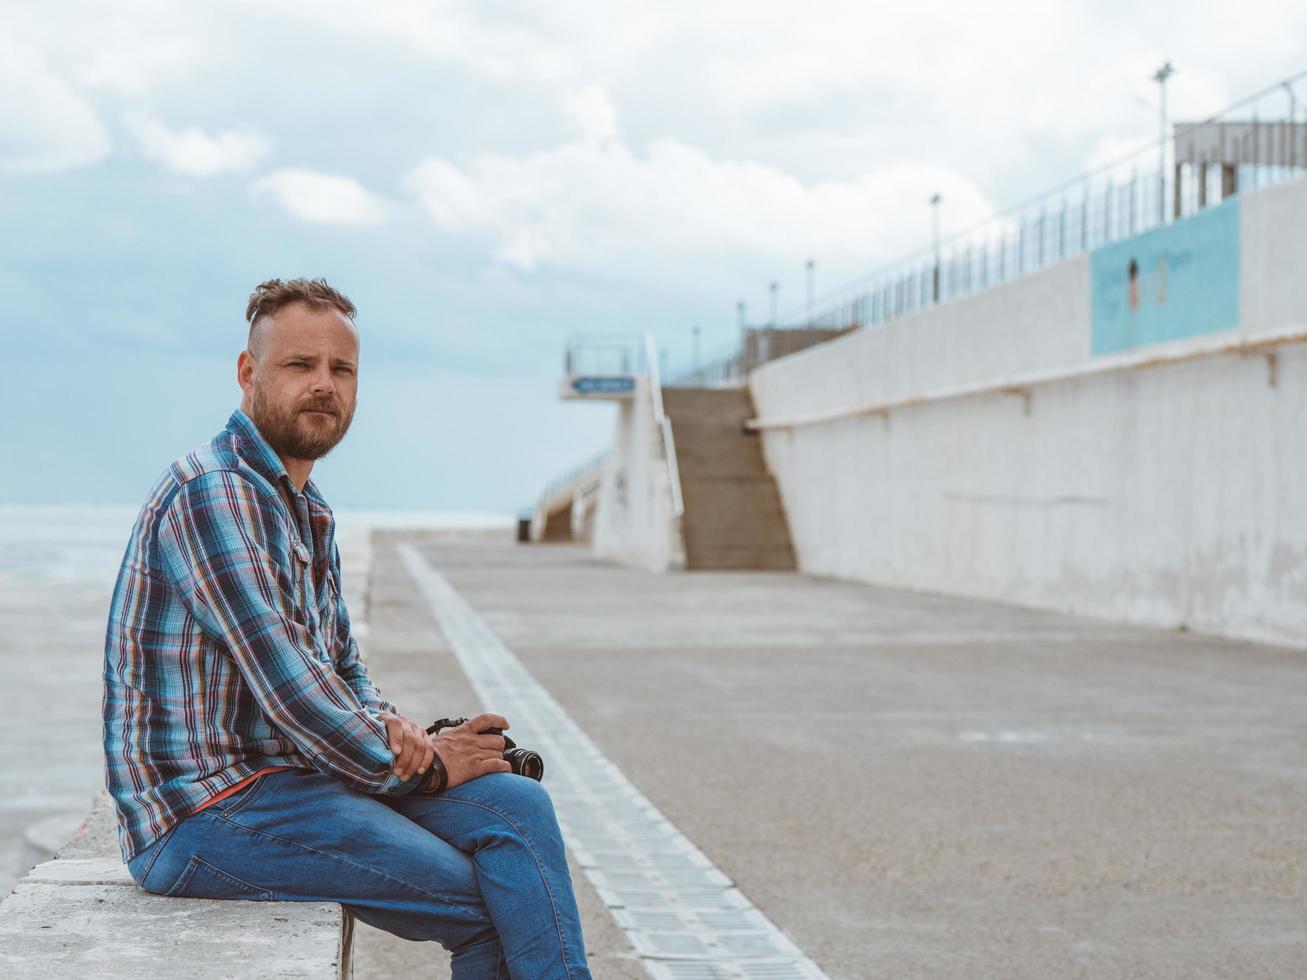 bearded man with mohawk sits on a concrete bench photo